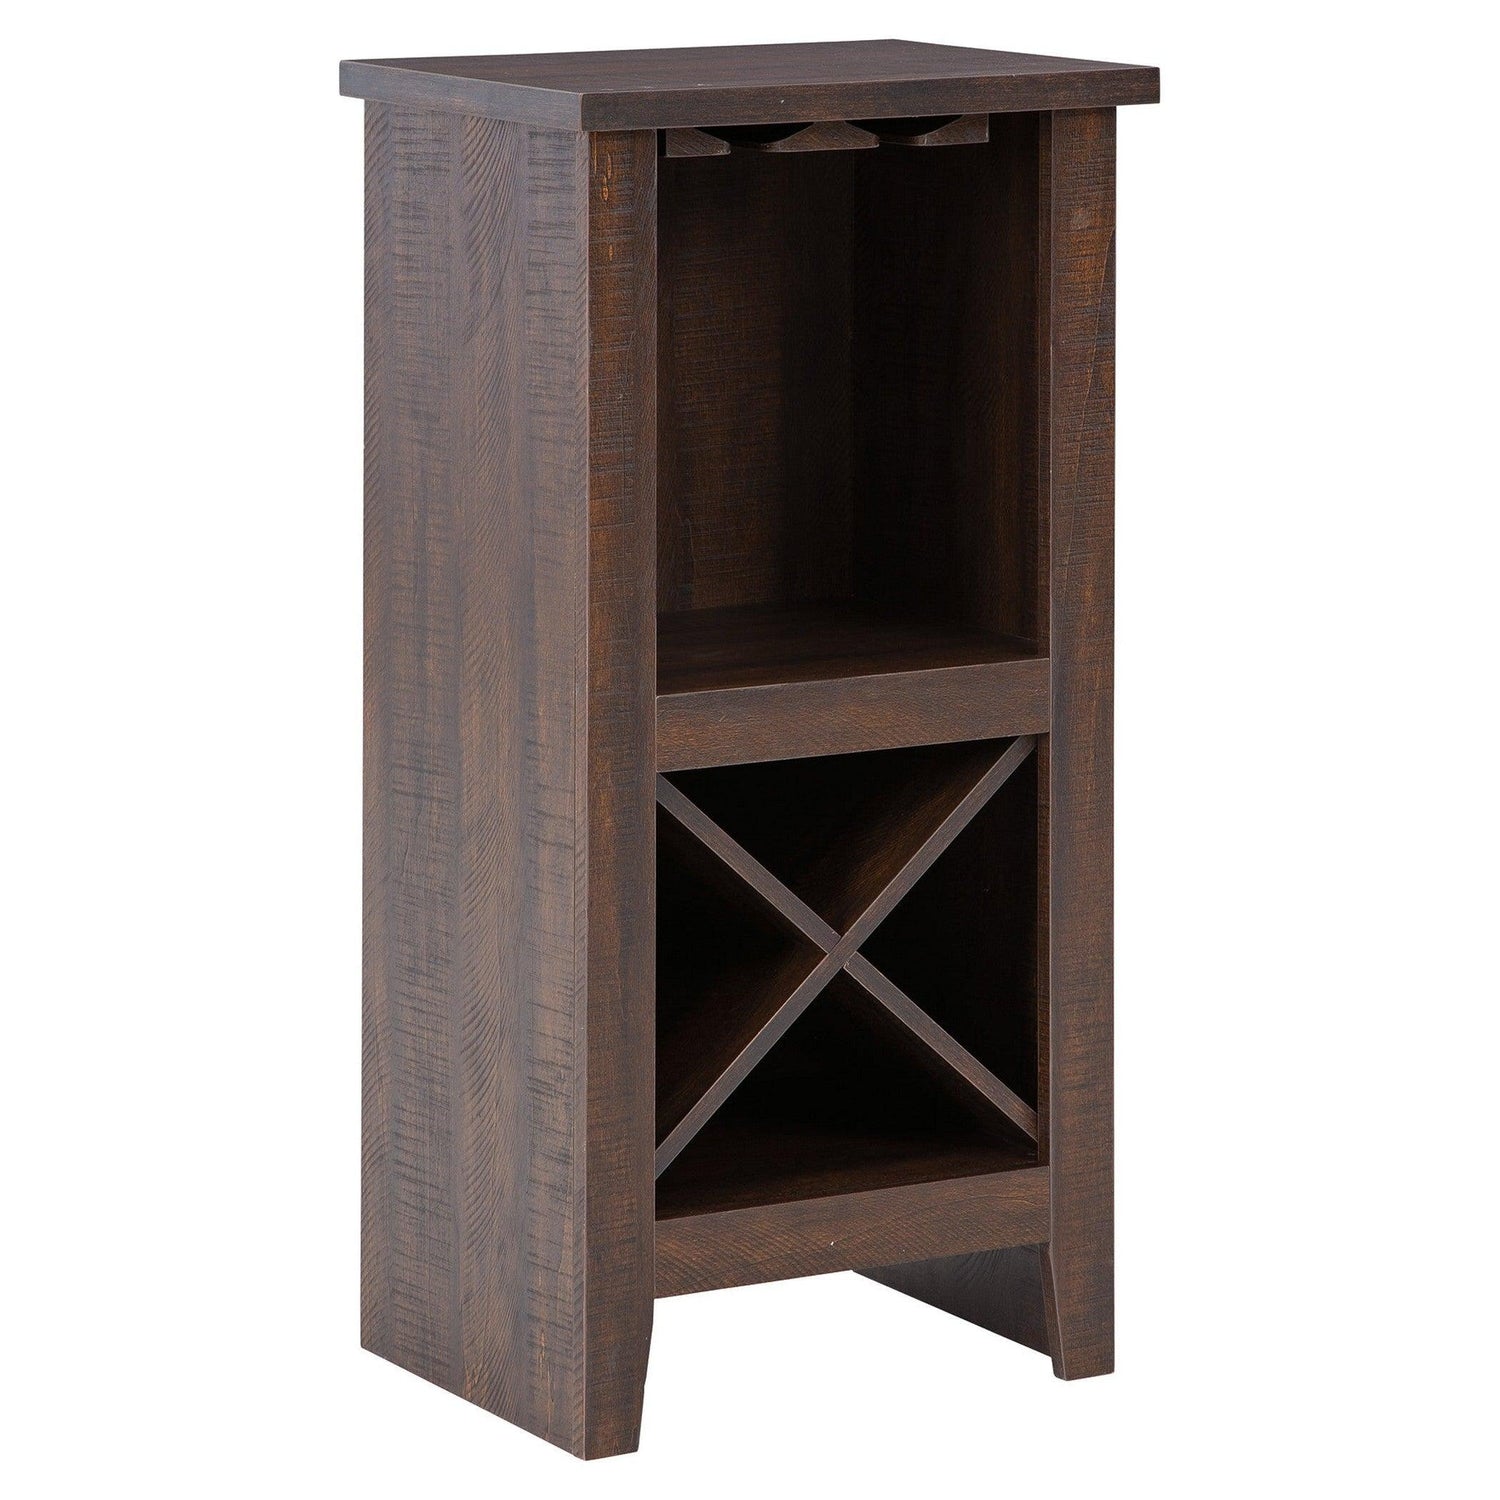 Turnley Accent Cabinet Ash-A4000330